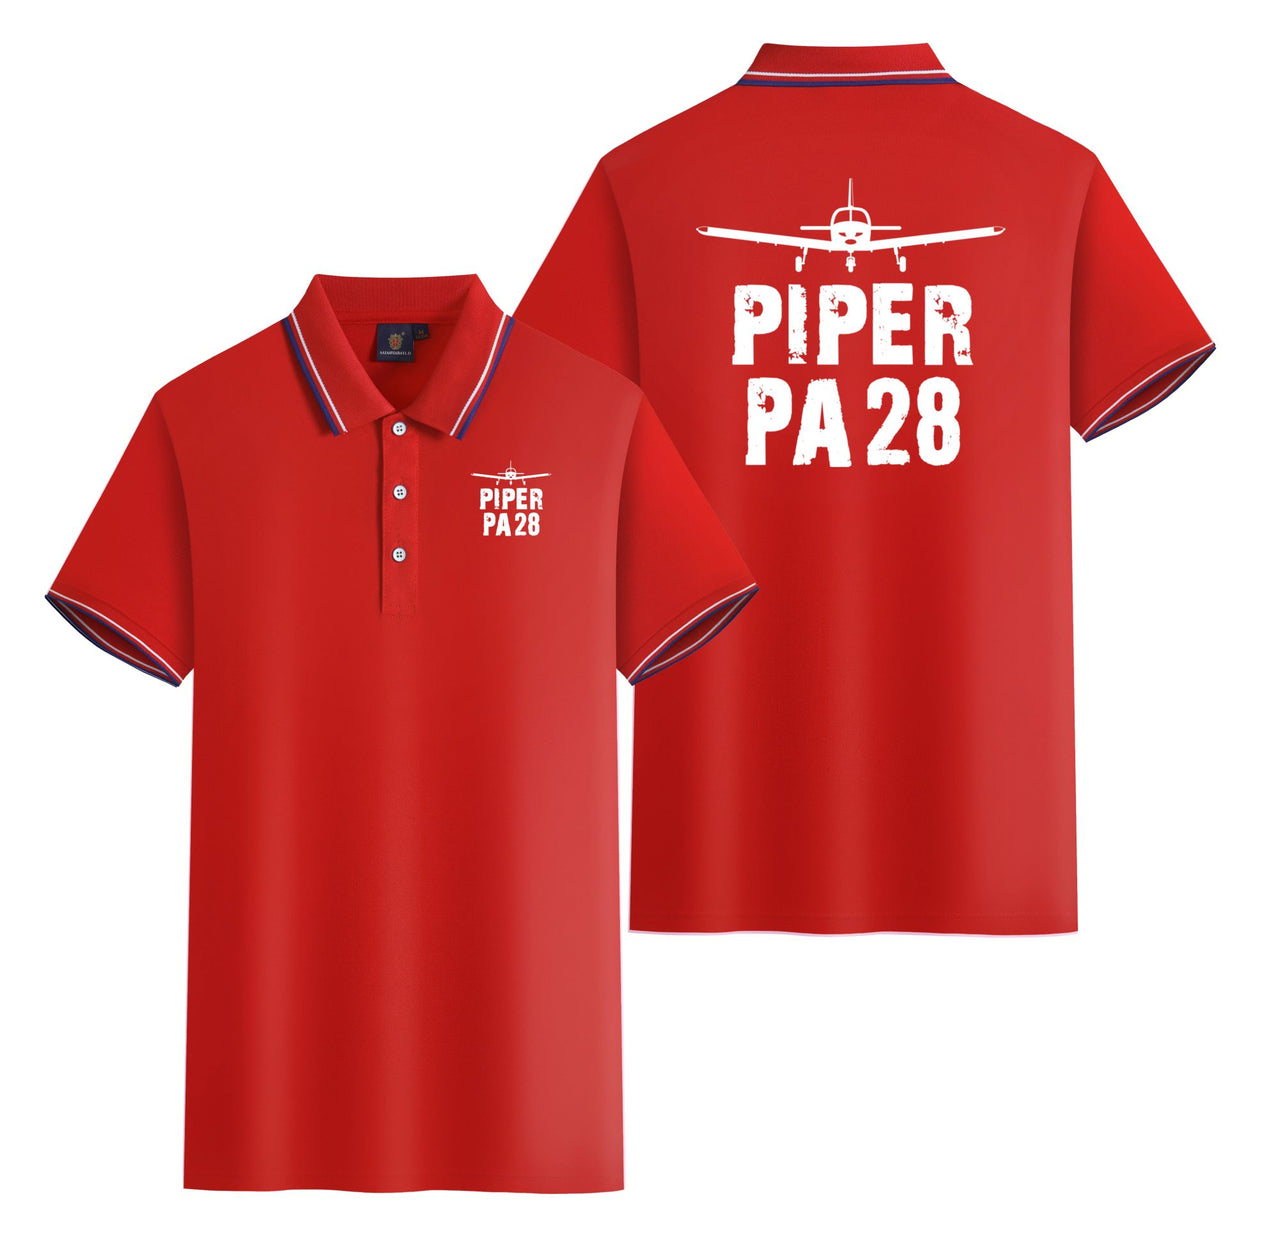 Piper PA28 & Plane Designed Stylish Polo T-Shirts (Double-Side)